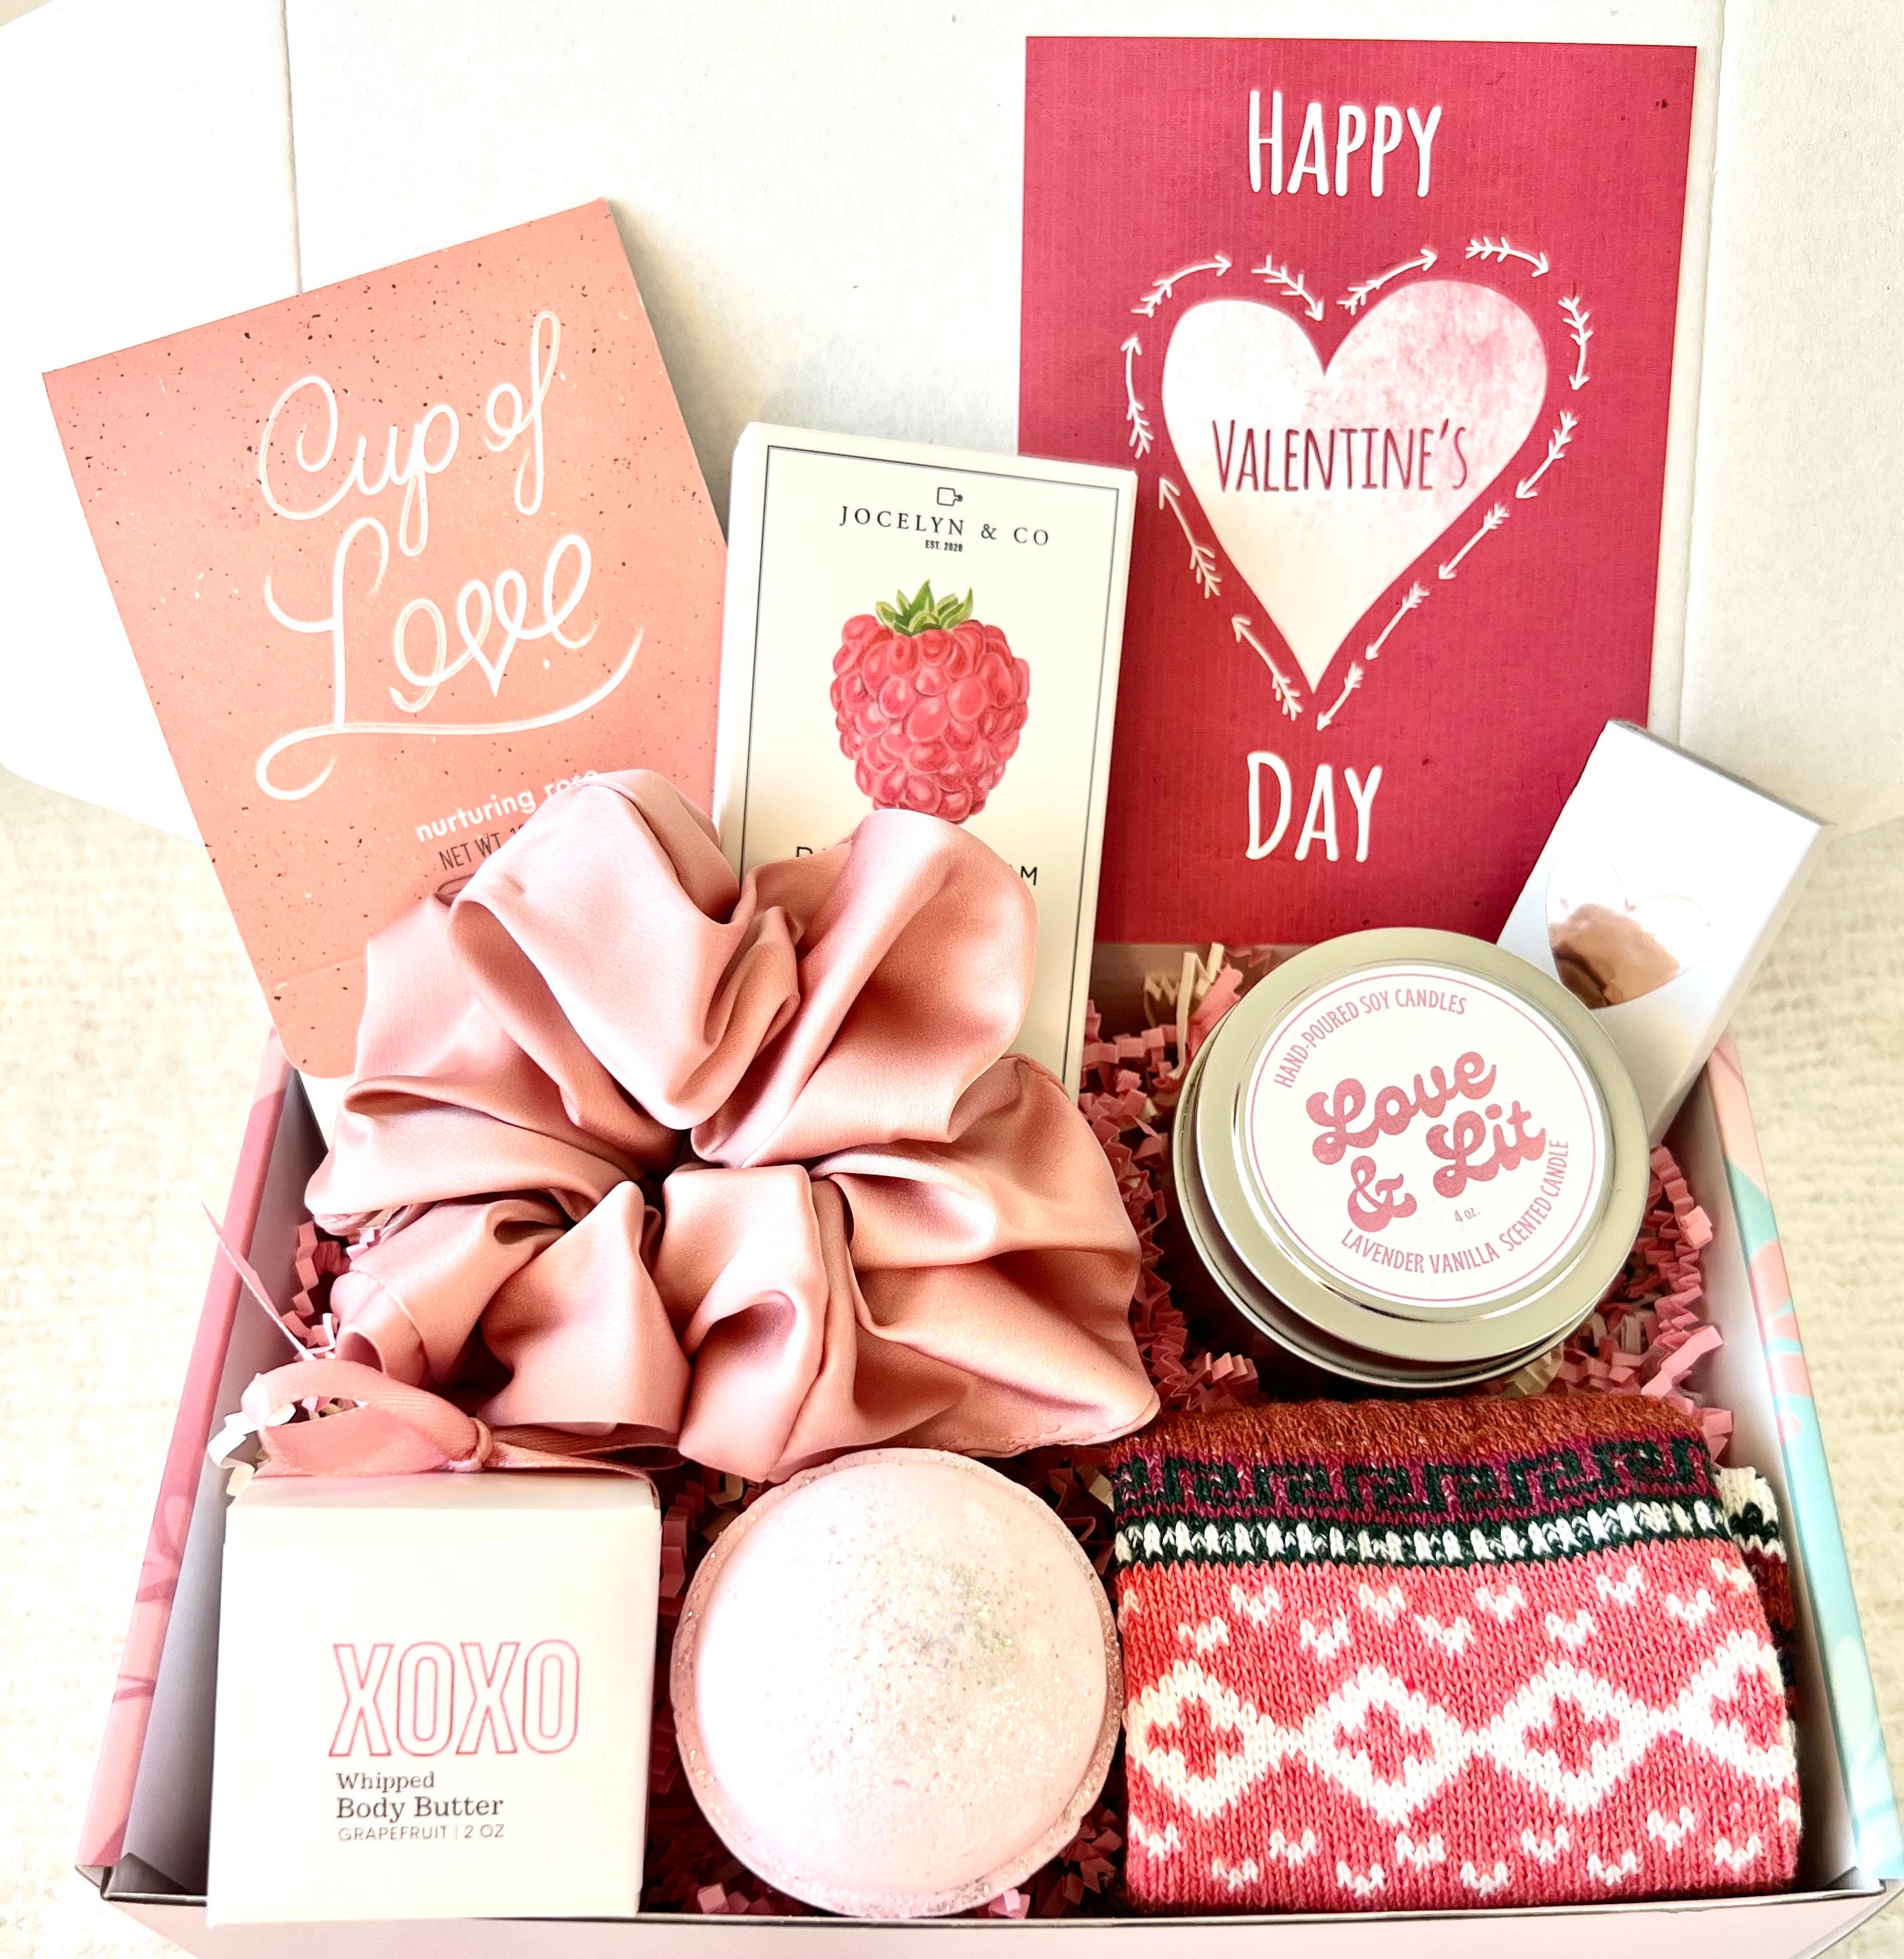 Valentines Day Gifts for Her/spa Gift Box/corporate Gift/happy Valentines  Day/spa Gift Kit for Her/gifts for Best Friend/personalized Gifts 